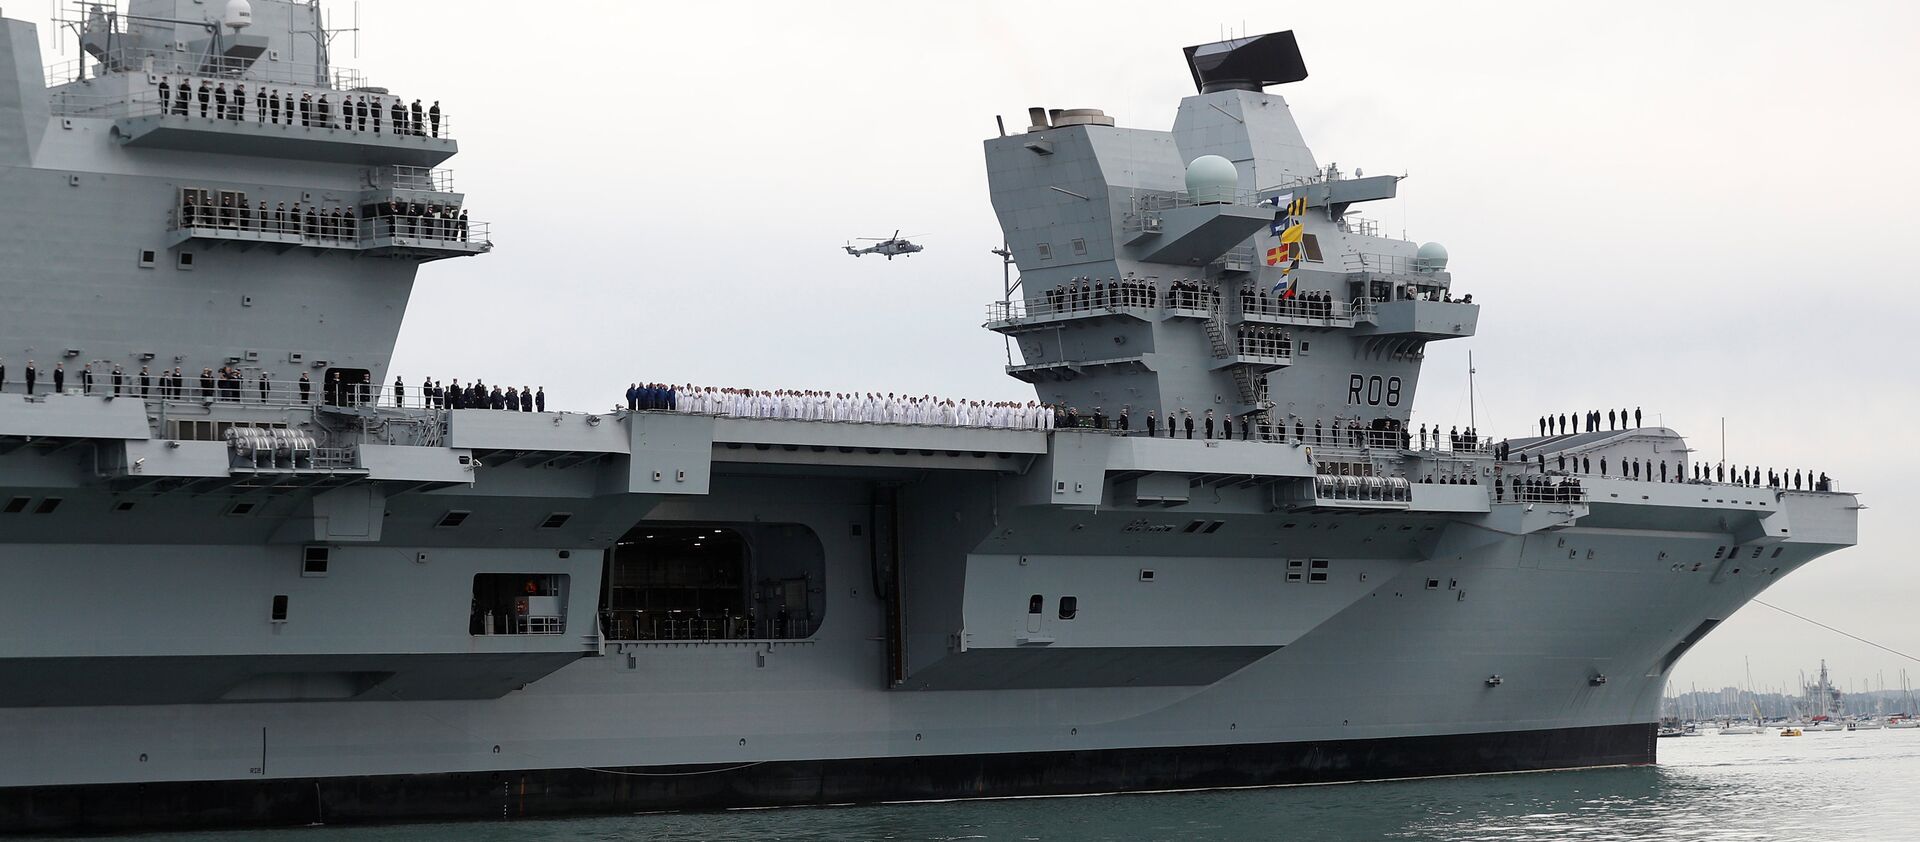 The Royal Navy's new aircraft carrier HMS Queen Elizabeth arrives in Portsmouth, Britain August 16, 2017 - سبوتنيك عربي, 1920, 16.11.2021